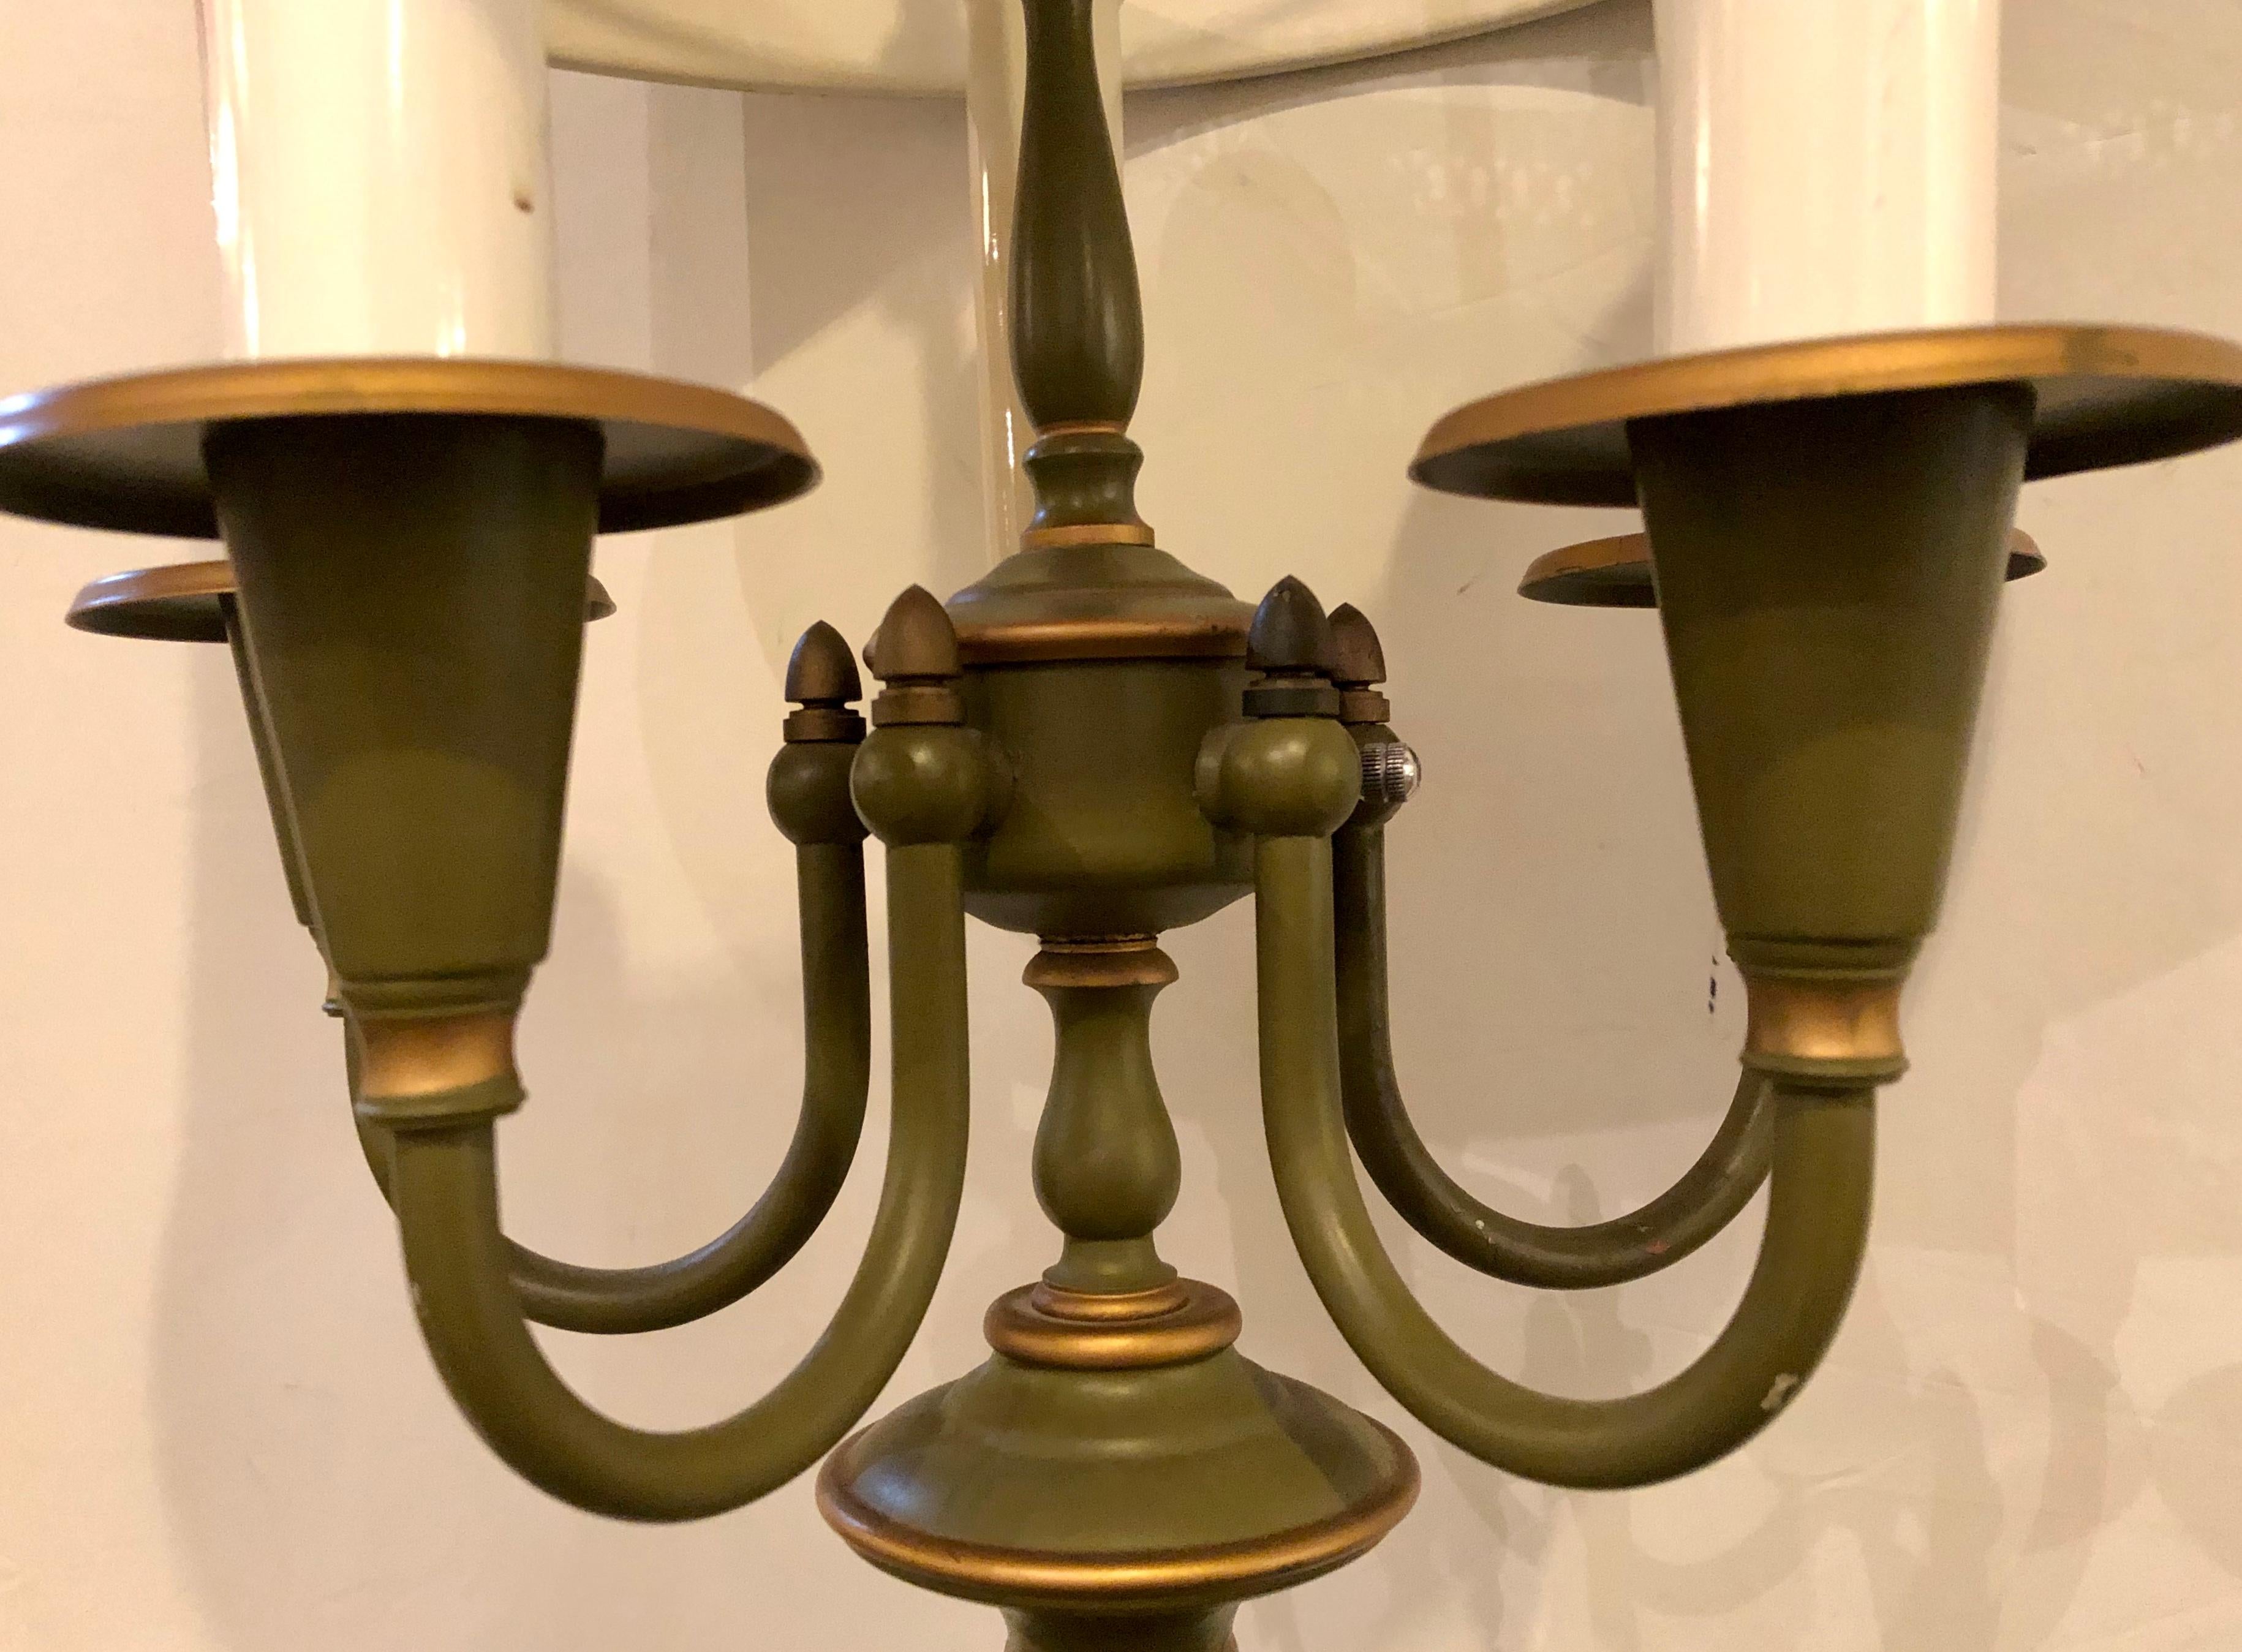 20th Century Tole Sage Green and Parcel Gilt Decorated Candelabra Lamp, Matching Tole Shade